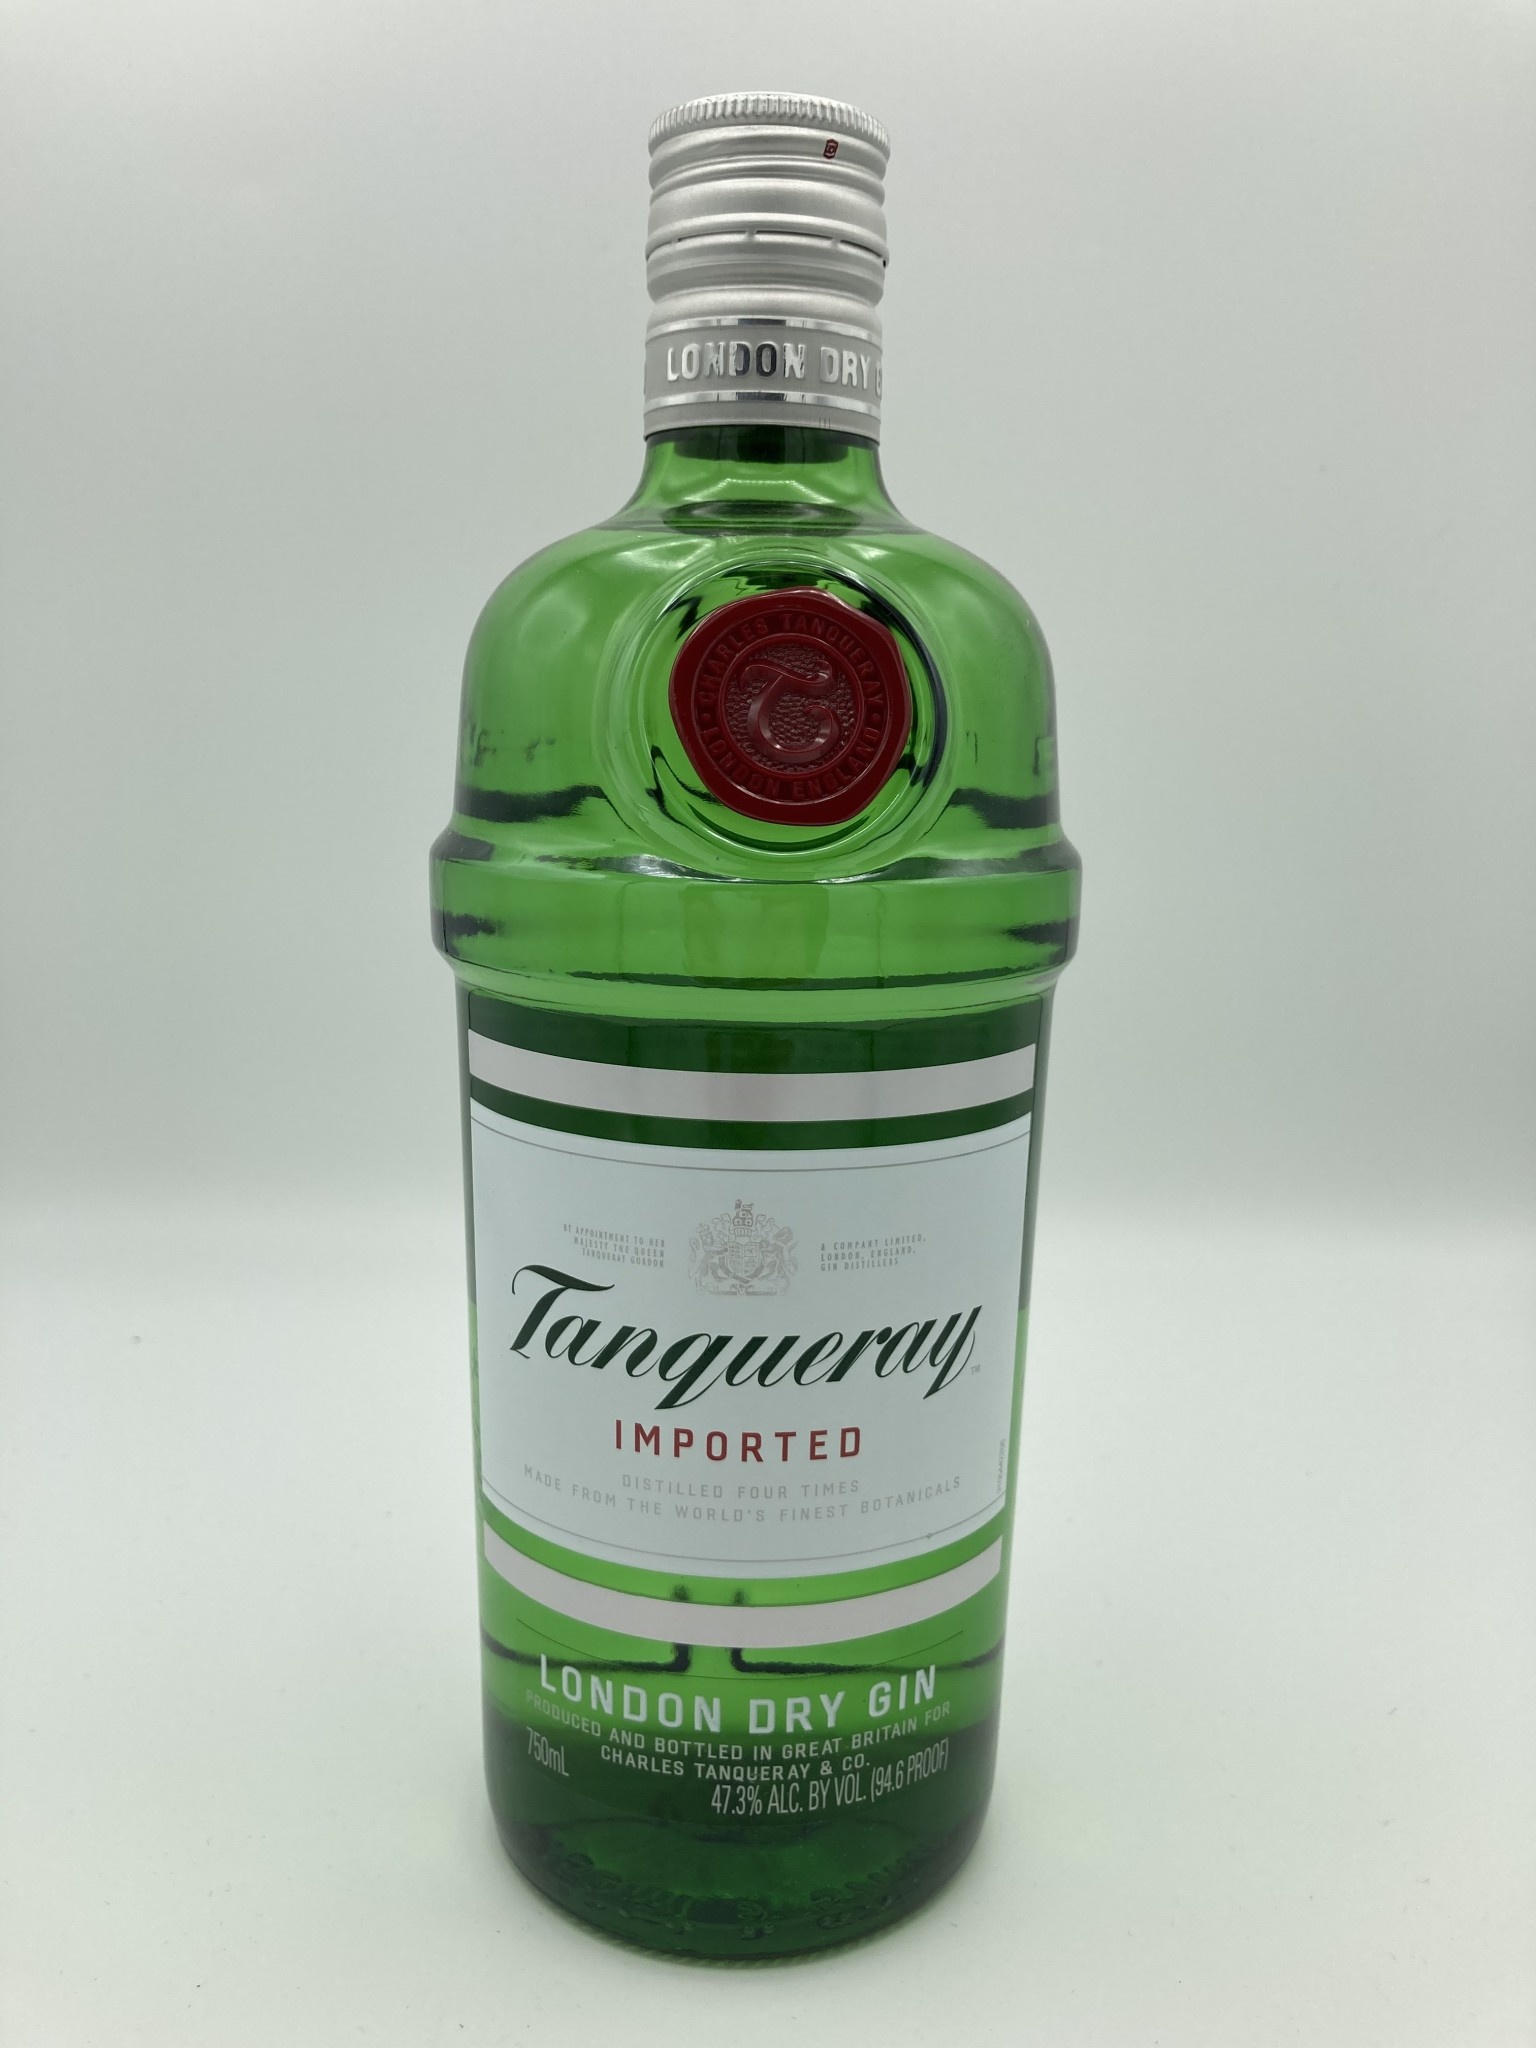 Tanqueray London Dry Gin, 750 ml, 47% ABV